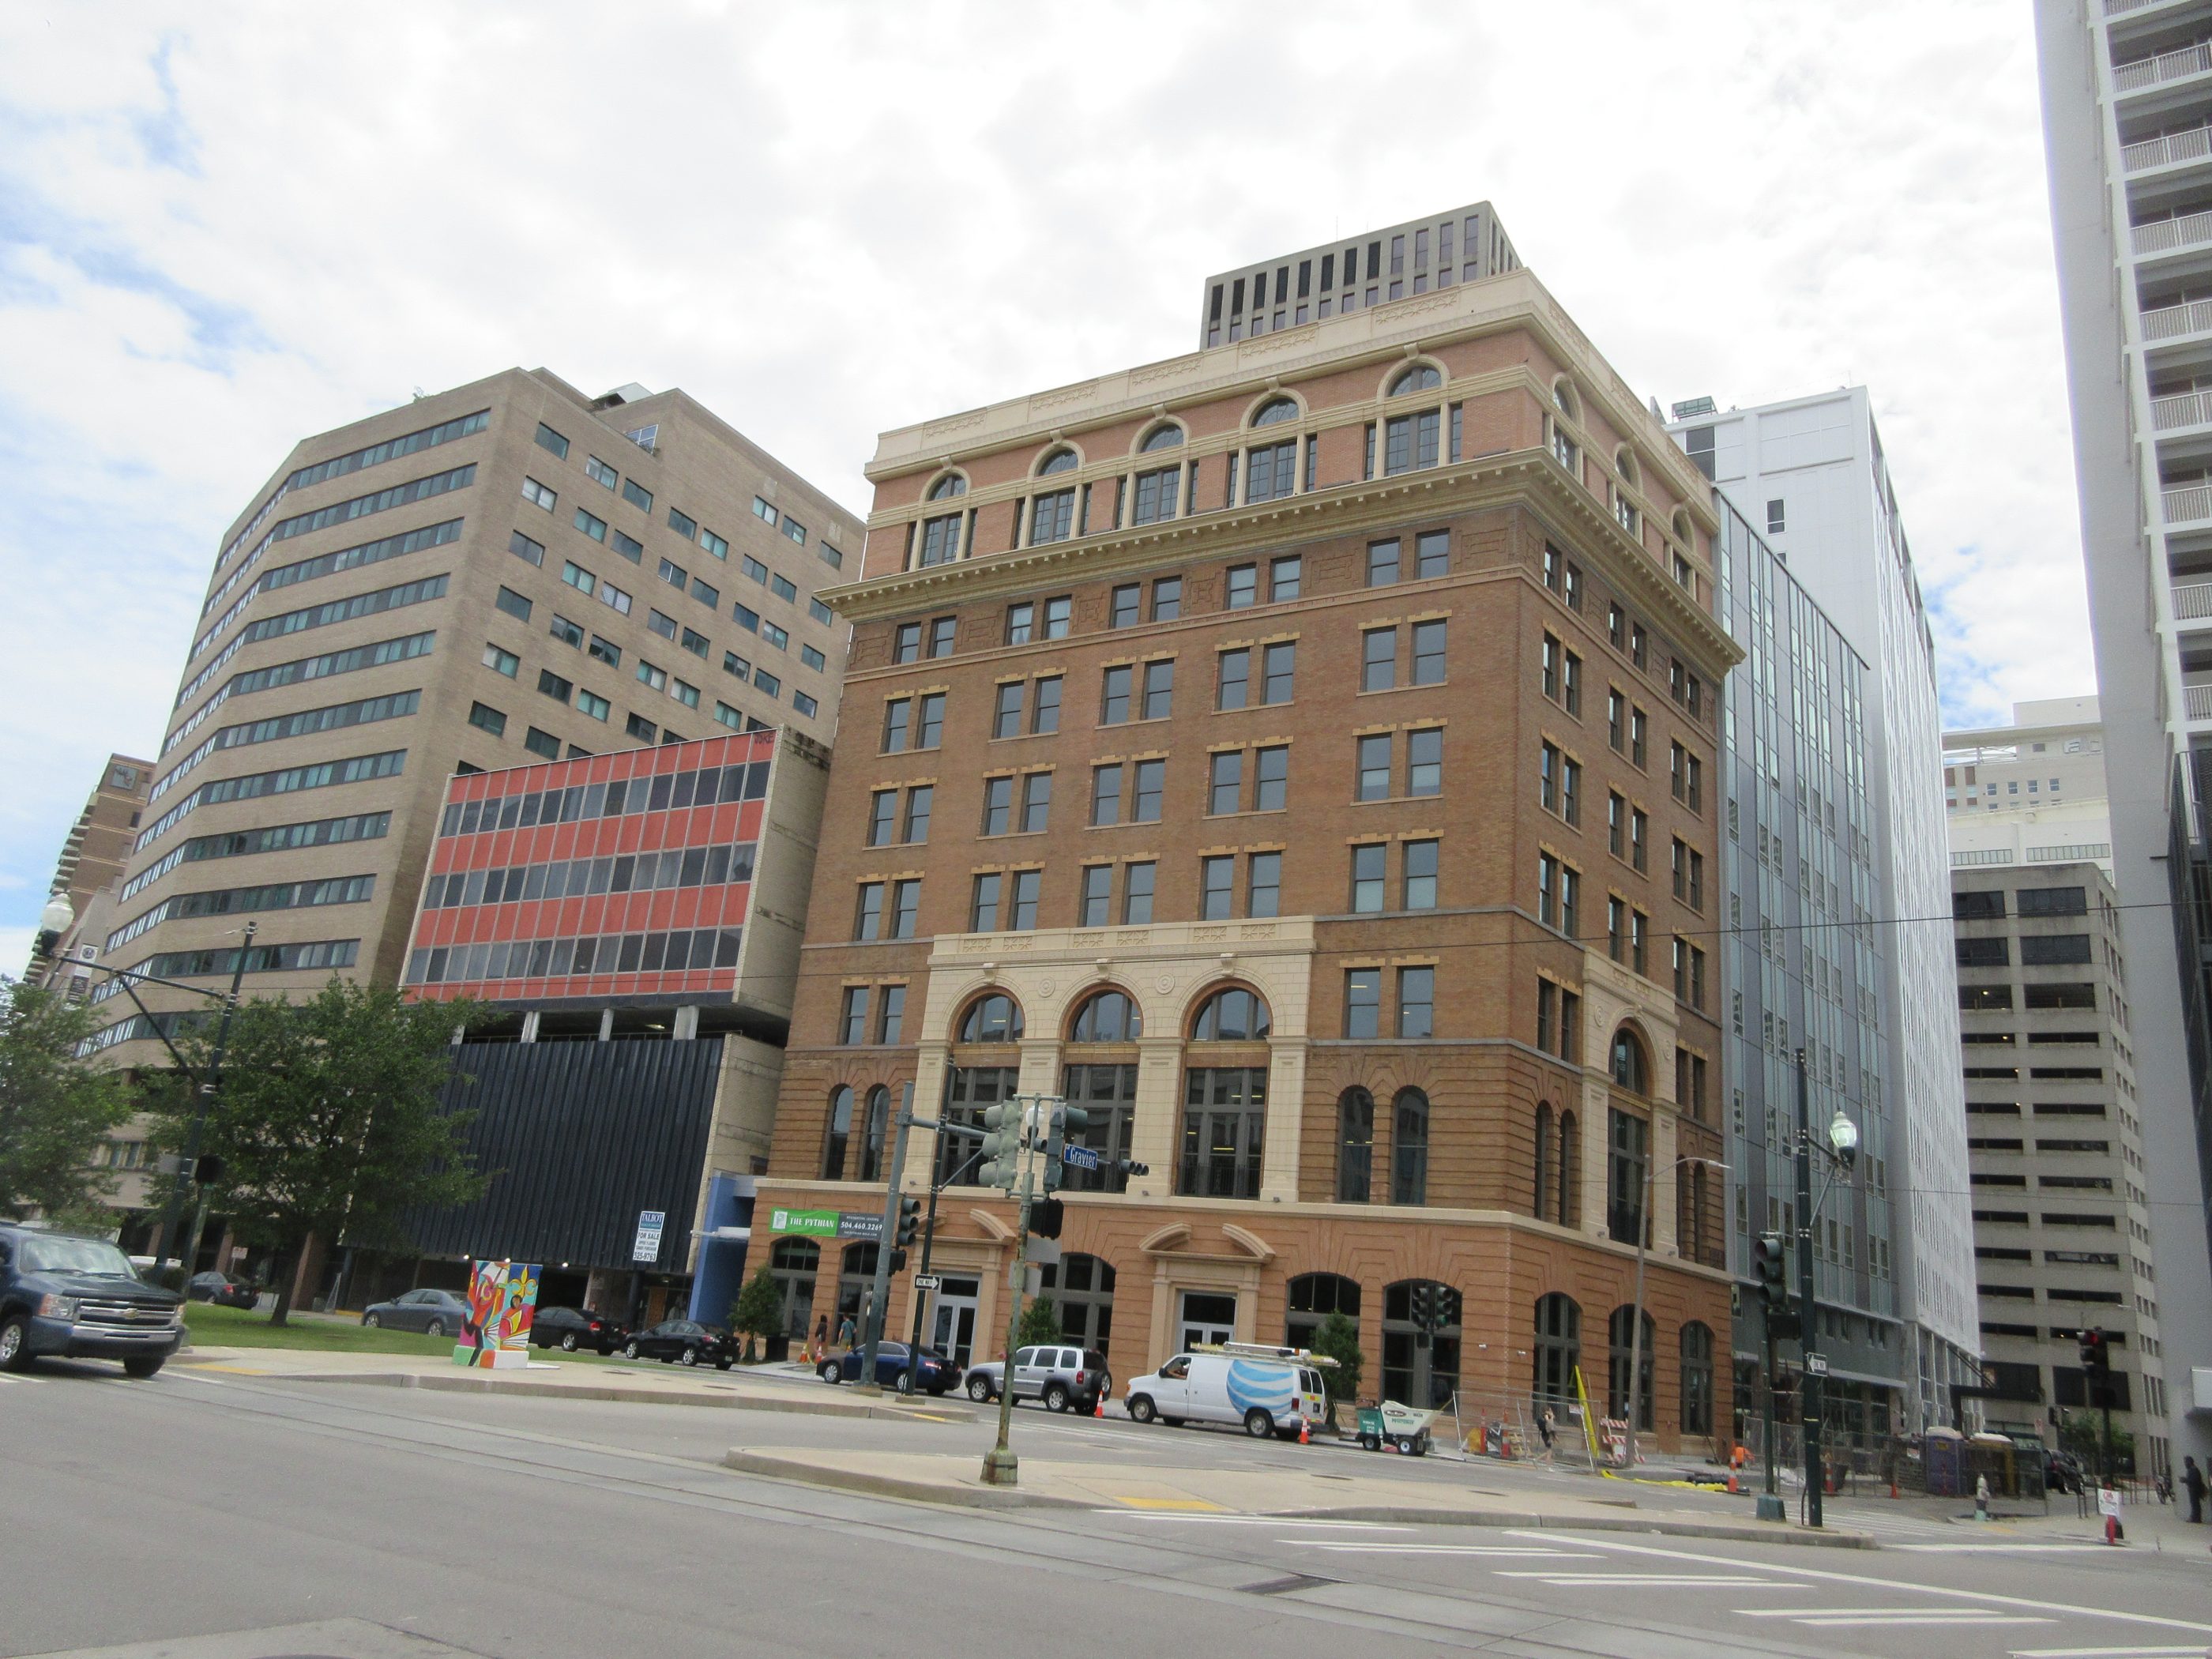 View from across the street of a restored nine-story building dating from 1909. The facade is brick and terra cotta, with arch details over the second-story windows and on the top floor windows.